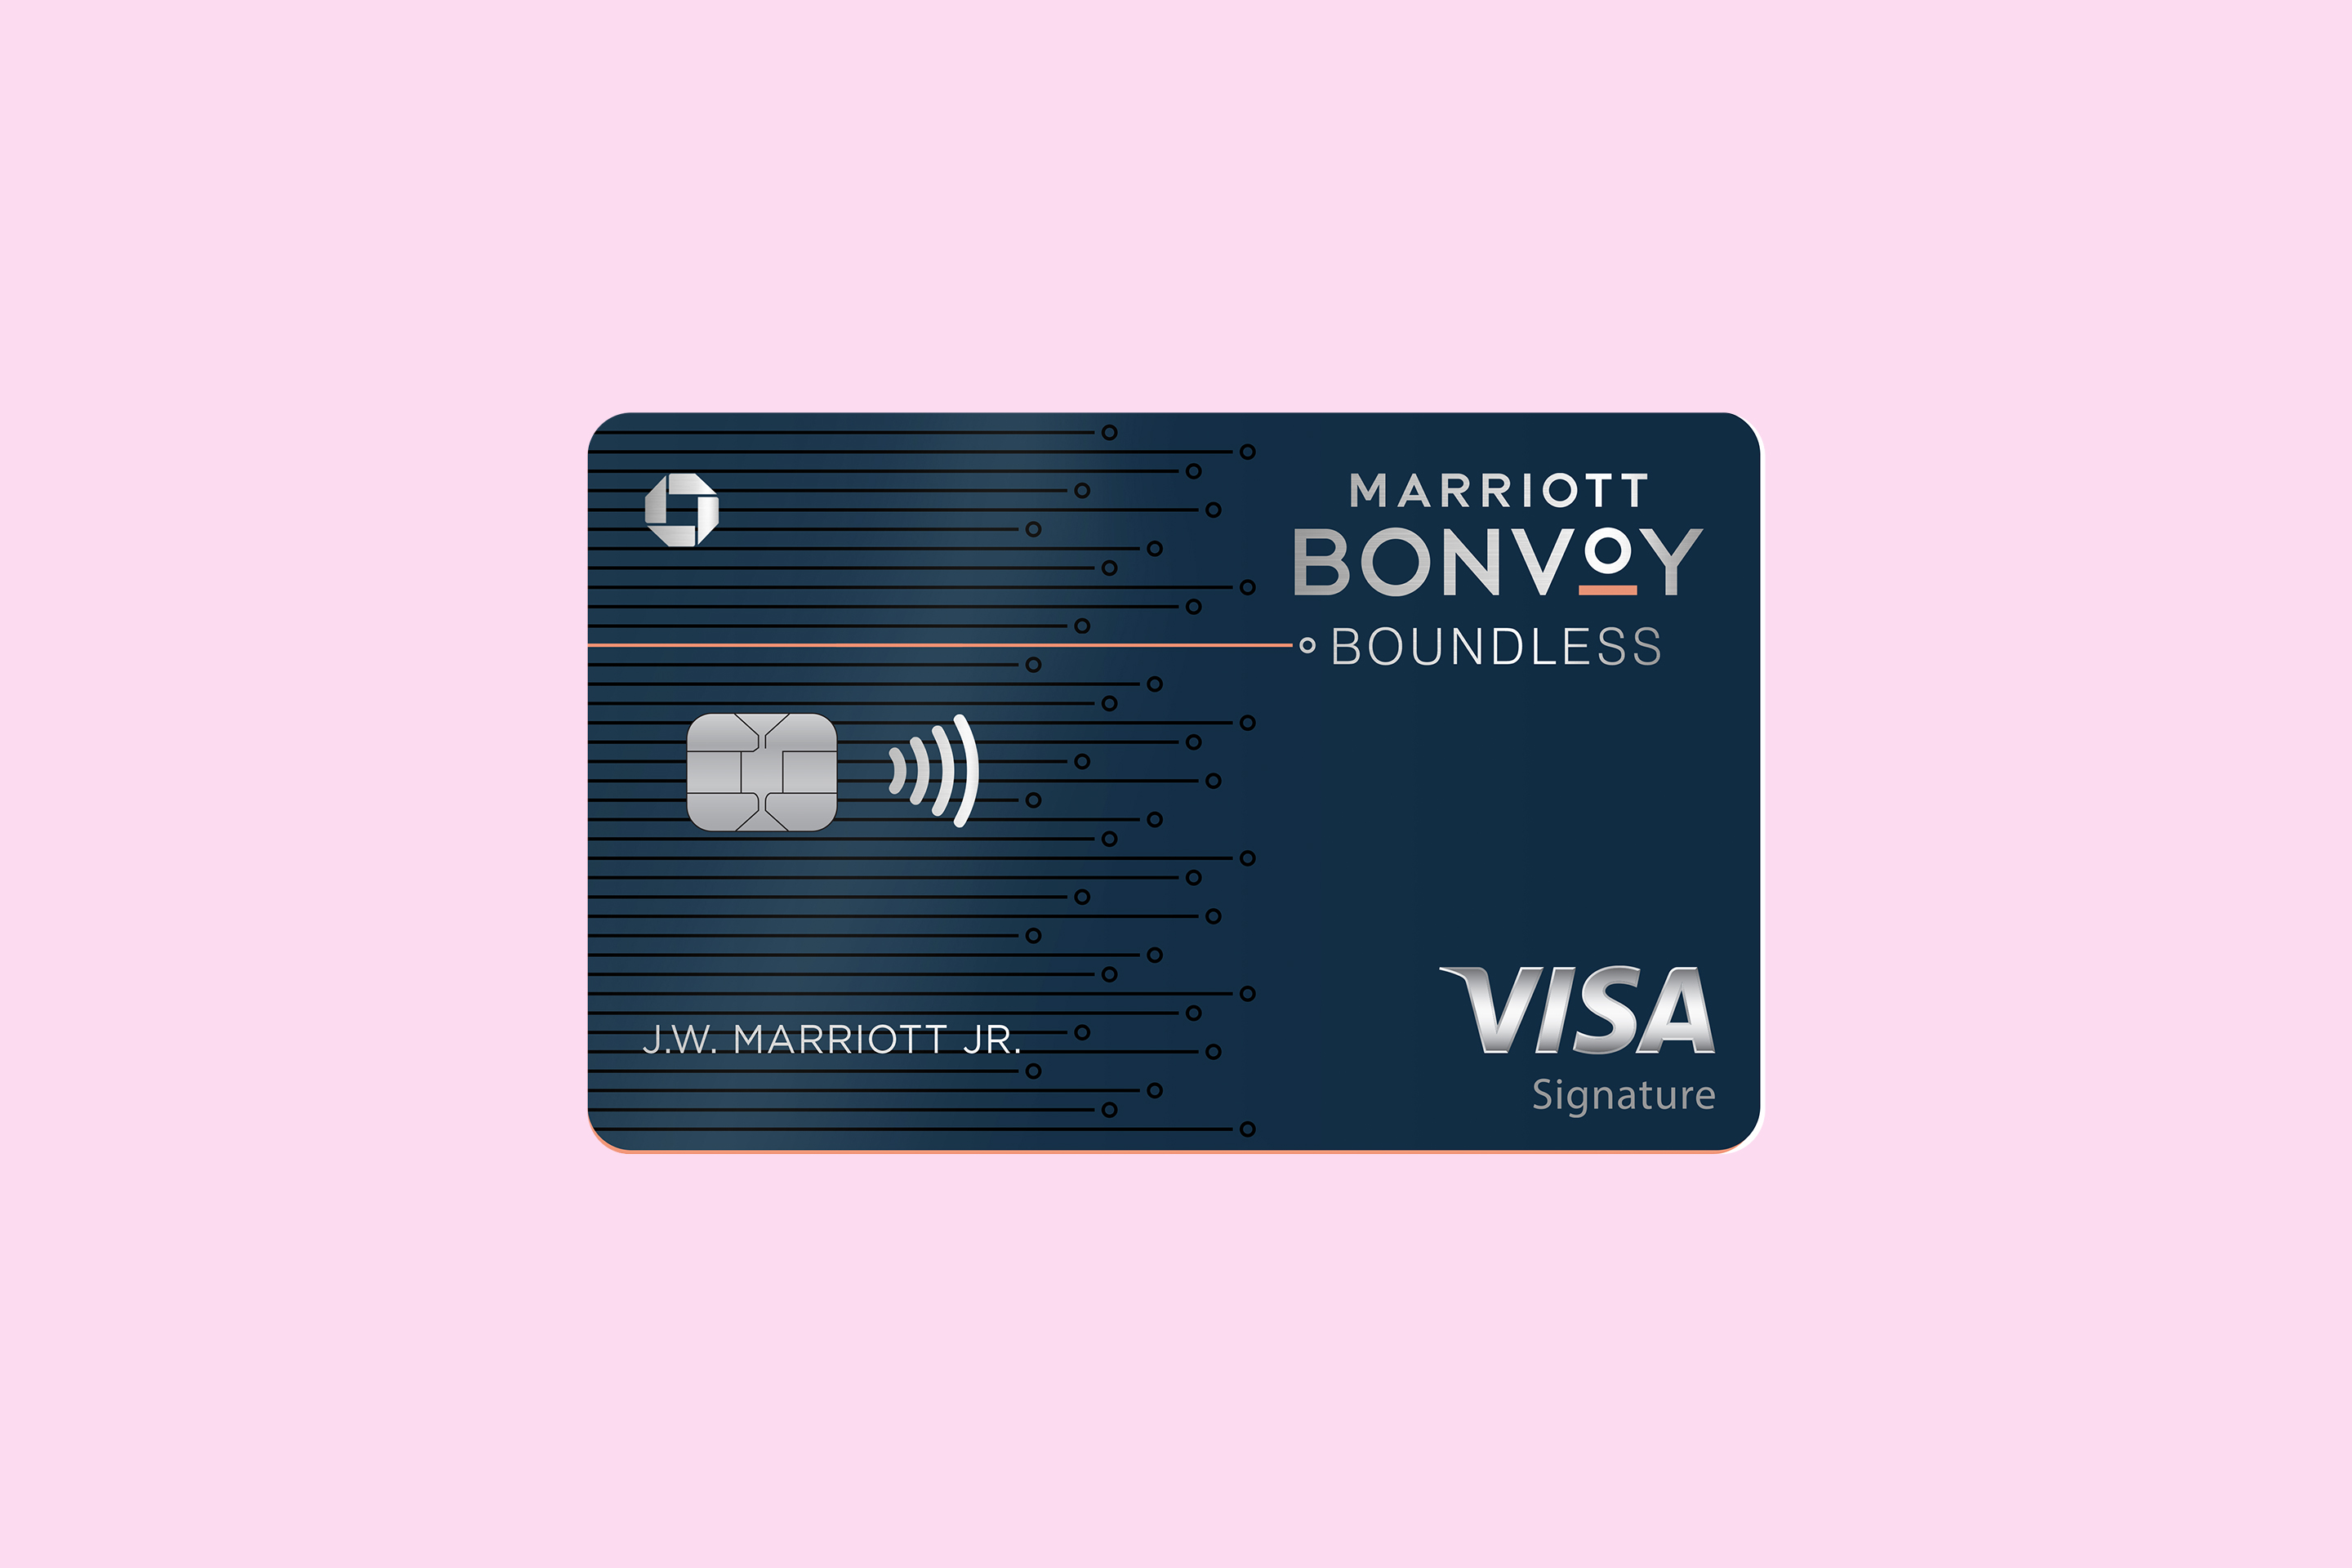 Marriott Bonvoy Boundless Credit Card by American Express